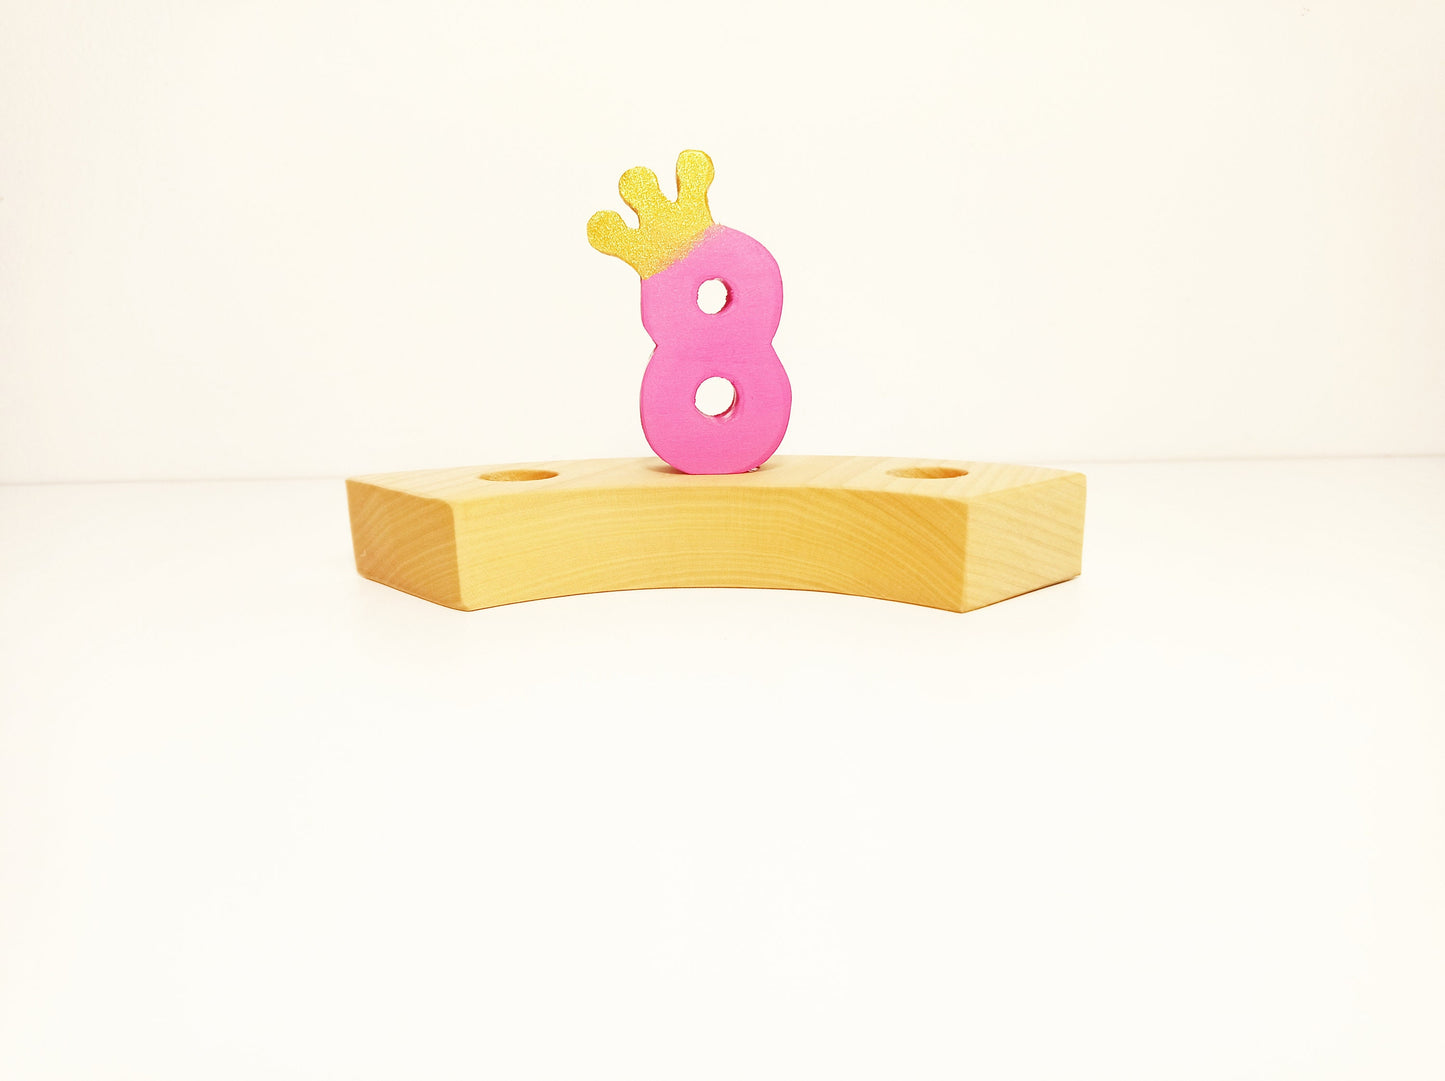 Number 8 birthday ring ornament, waldorf ring ornament, waldorf decoration, birthday ring, birthday decorations, waldorf numbers, jaar ring